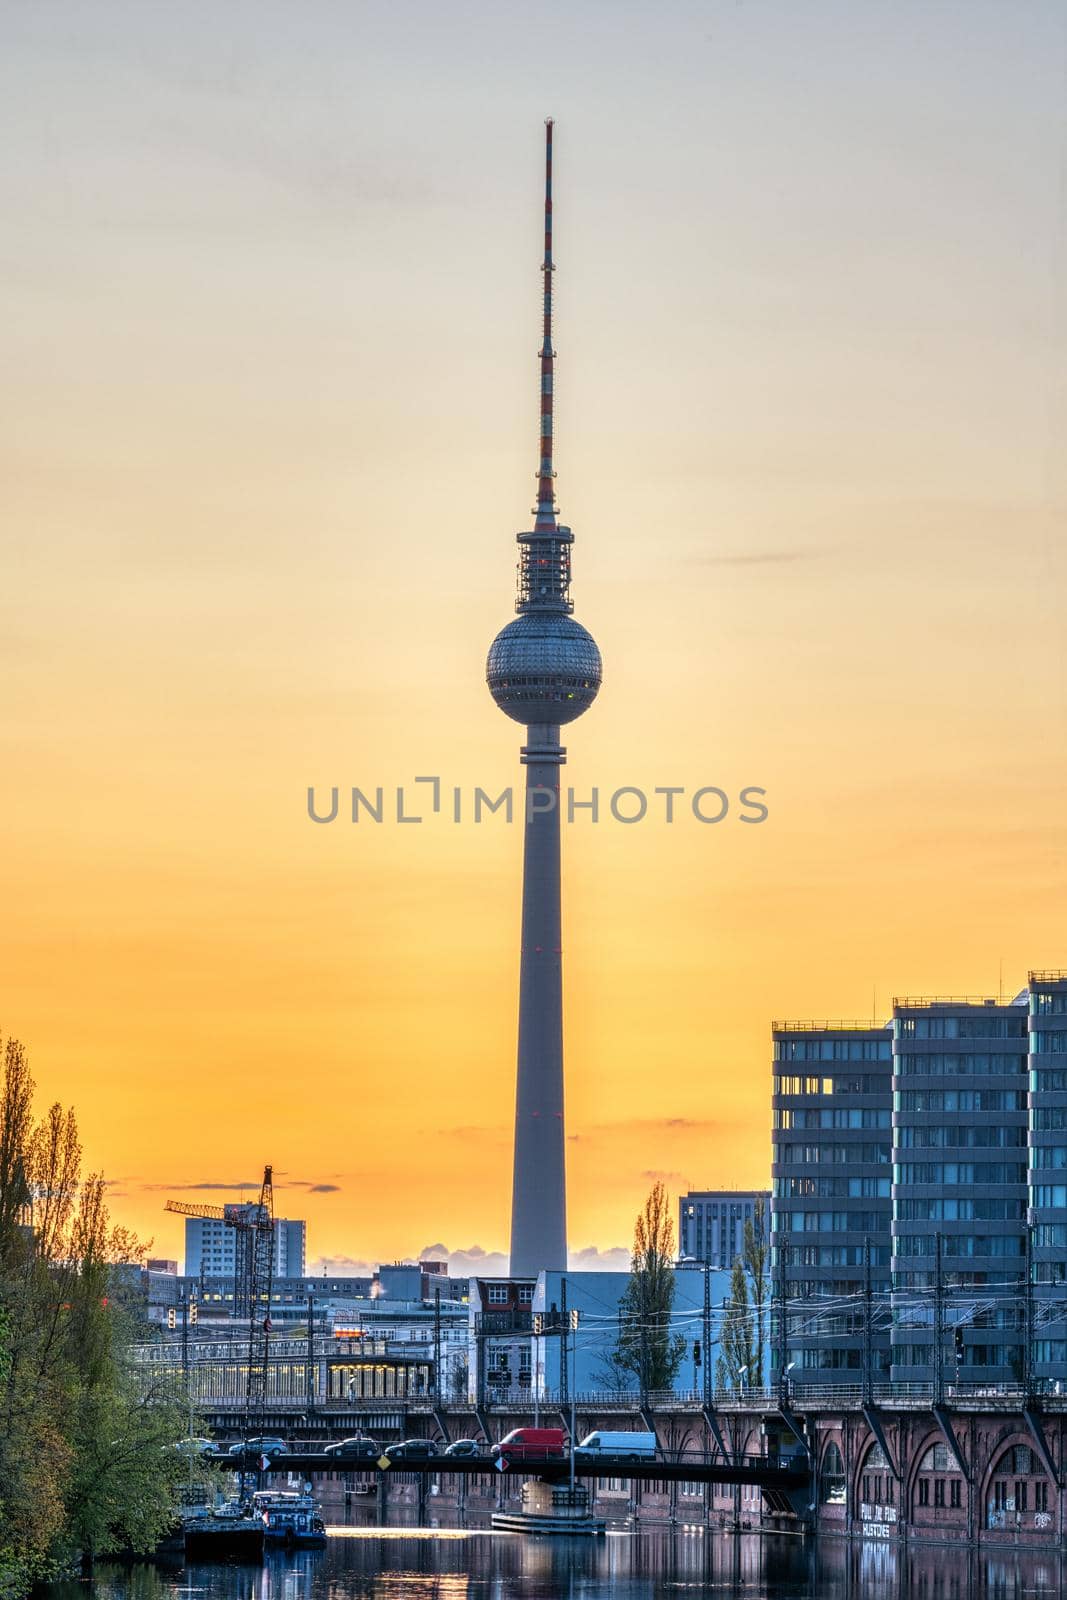 The famous Television Tower and the river Spree in Berlin at sunset